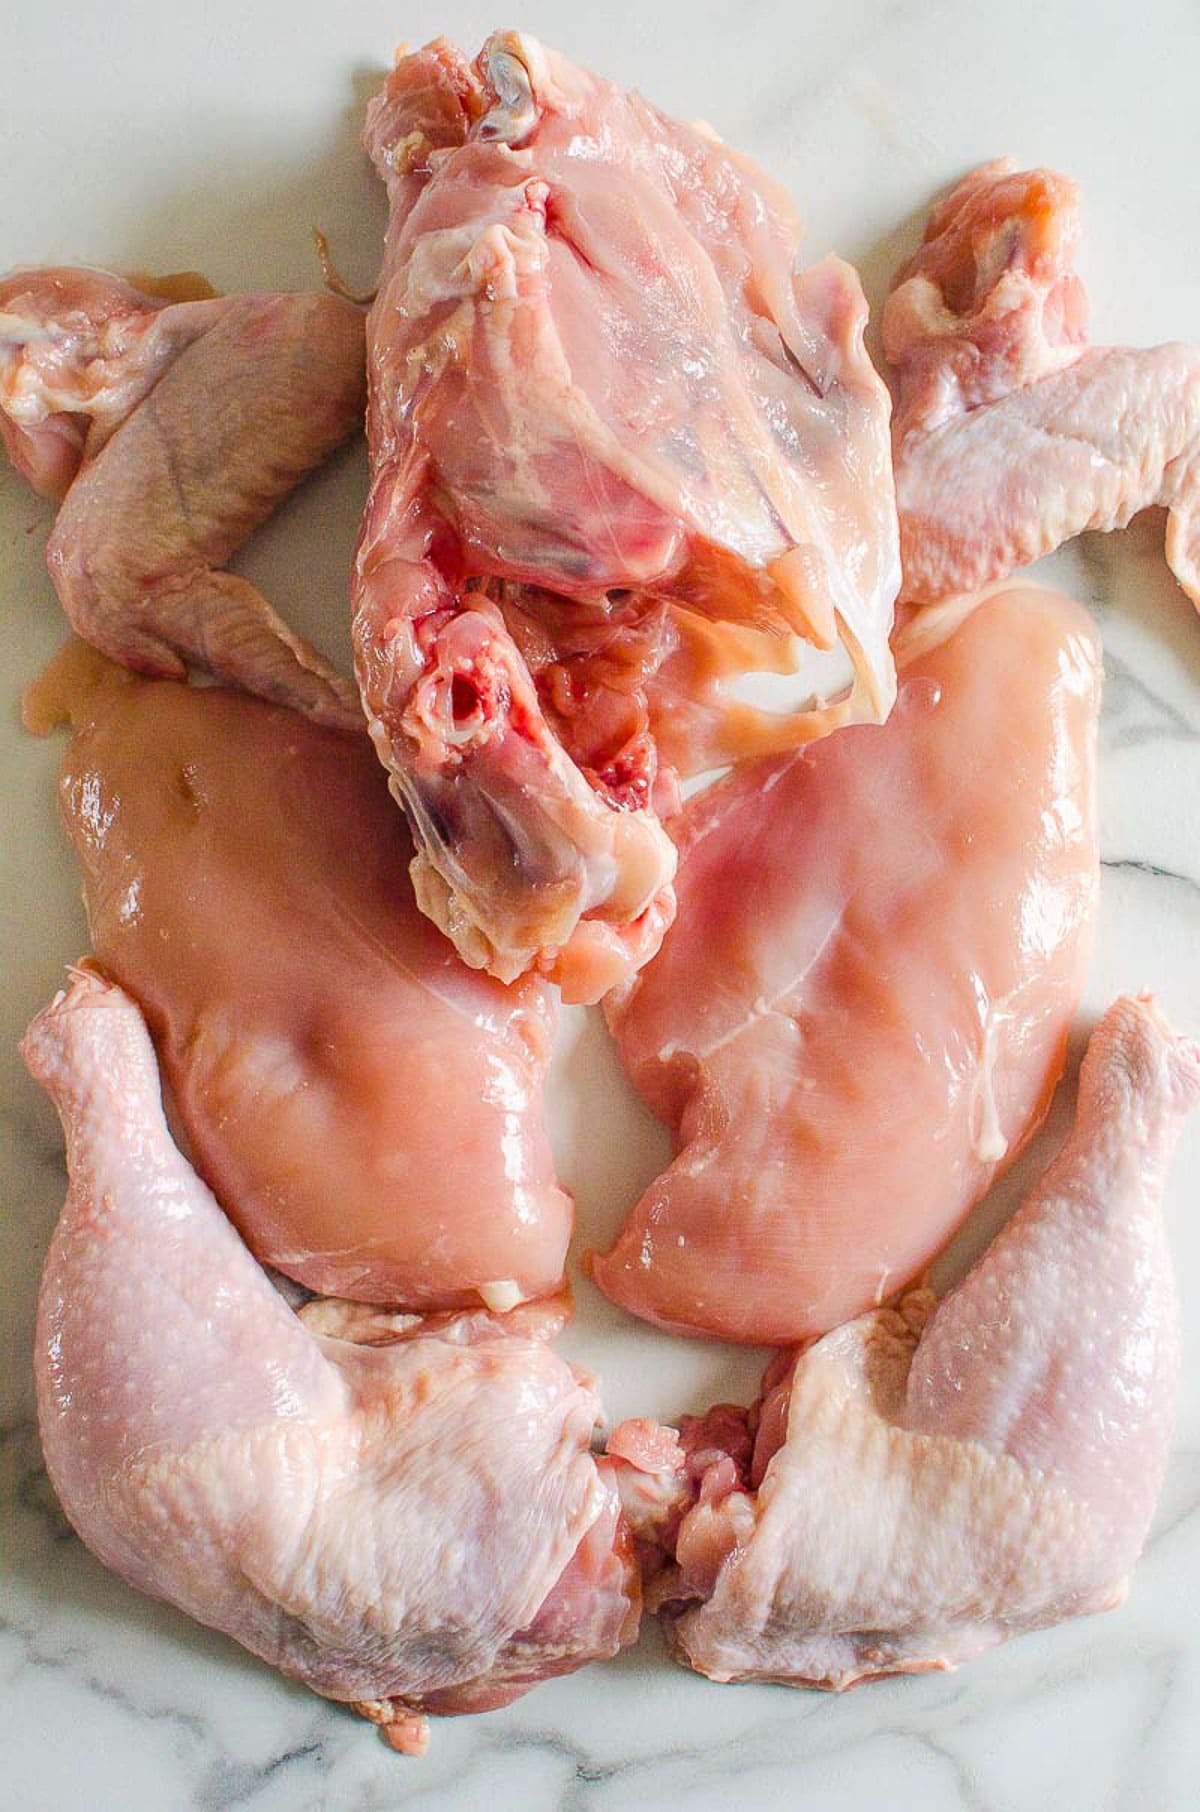 Chicken legs, chicken breasts, chicken wings and chicken carcass on a kitchen counter.